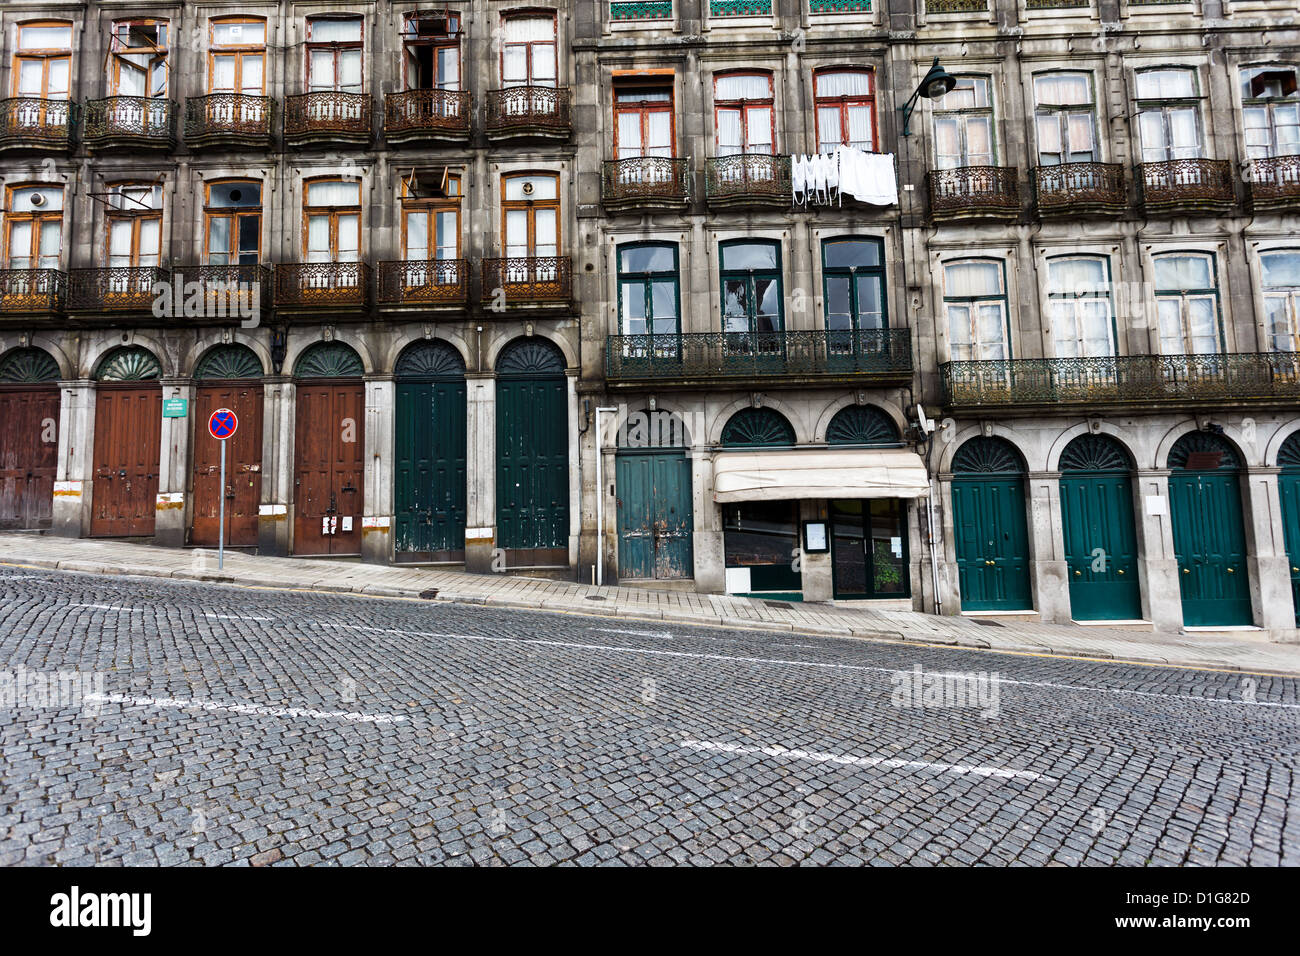 Facade of the lower stories of an apartment house on a steeply sloped cobblestone street in Porto Portgal. Stock Photo